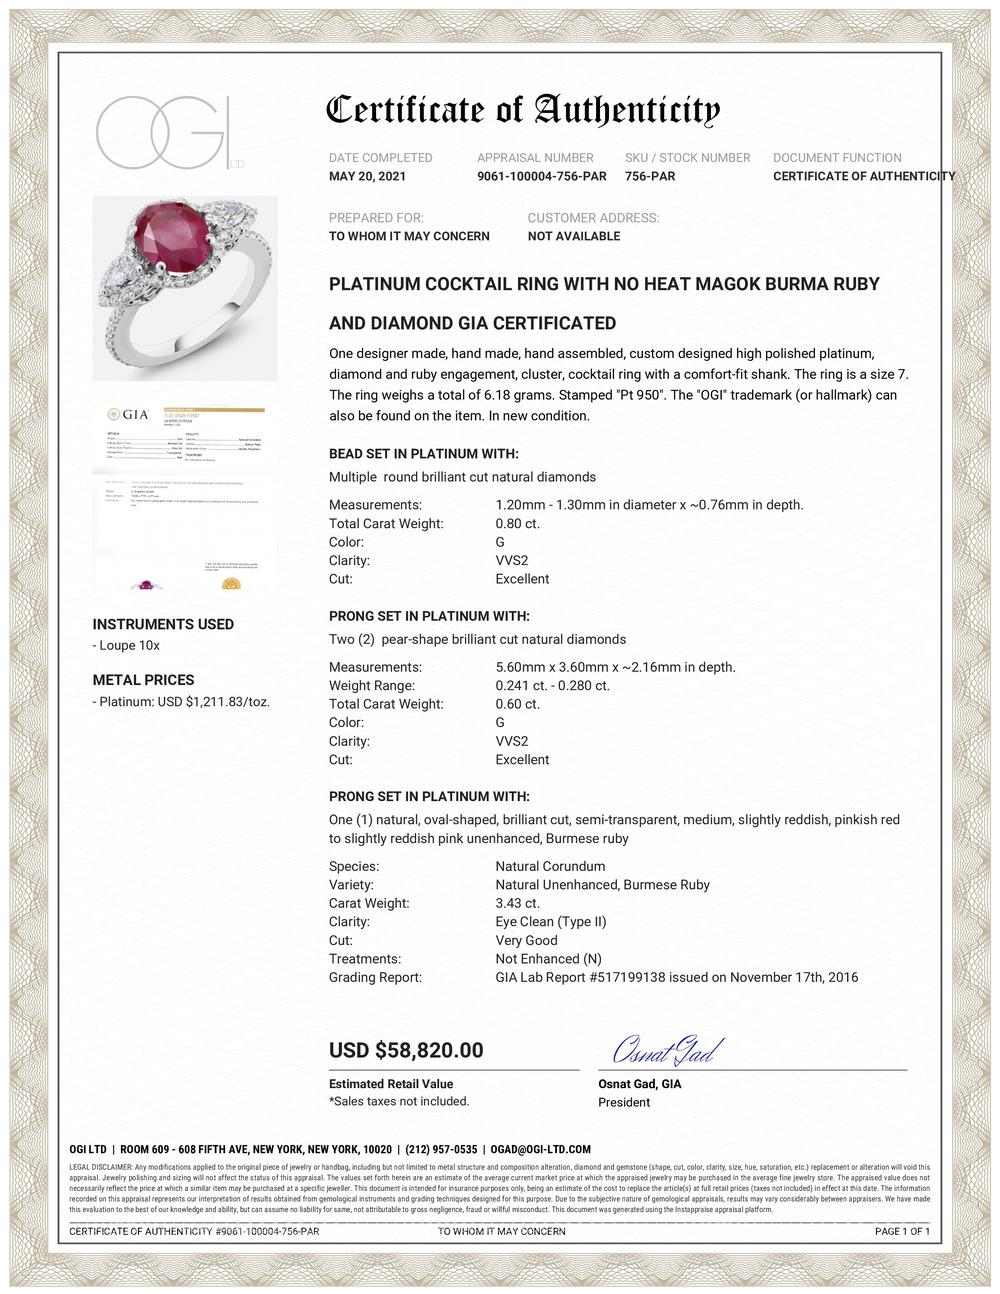 Platinum GIA certified Country of Origin Myanmar, one of a Kind, 3.43 carat Burma ruby platinum ring 
Certified as no indication of heat 
Pear shape diamonds side stones weighing 0.60 carat
Surrounded by pave-set diamonds weighing 0.80 carats 